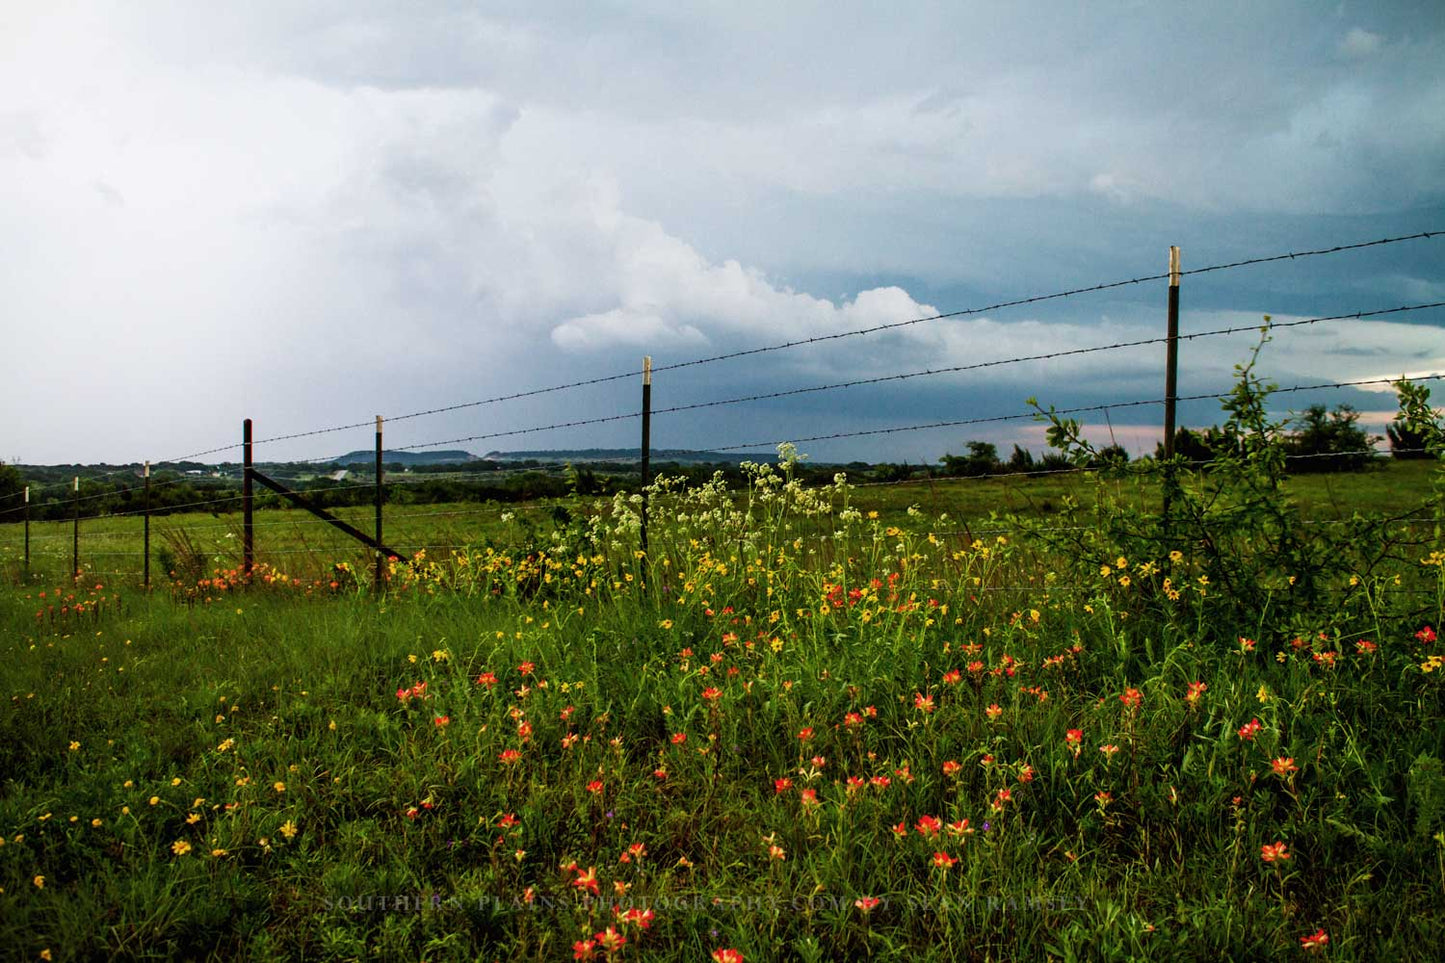 Vintage style photography print of wildflowers along a barbed wire fence on a stormy spring day in Texas by Sean Ramsey of Southern Plains Photography.